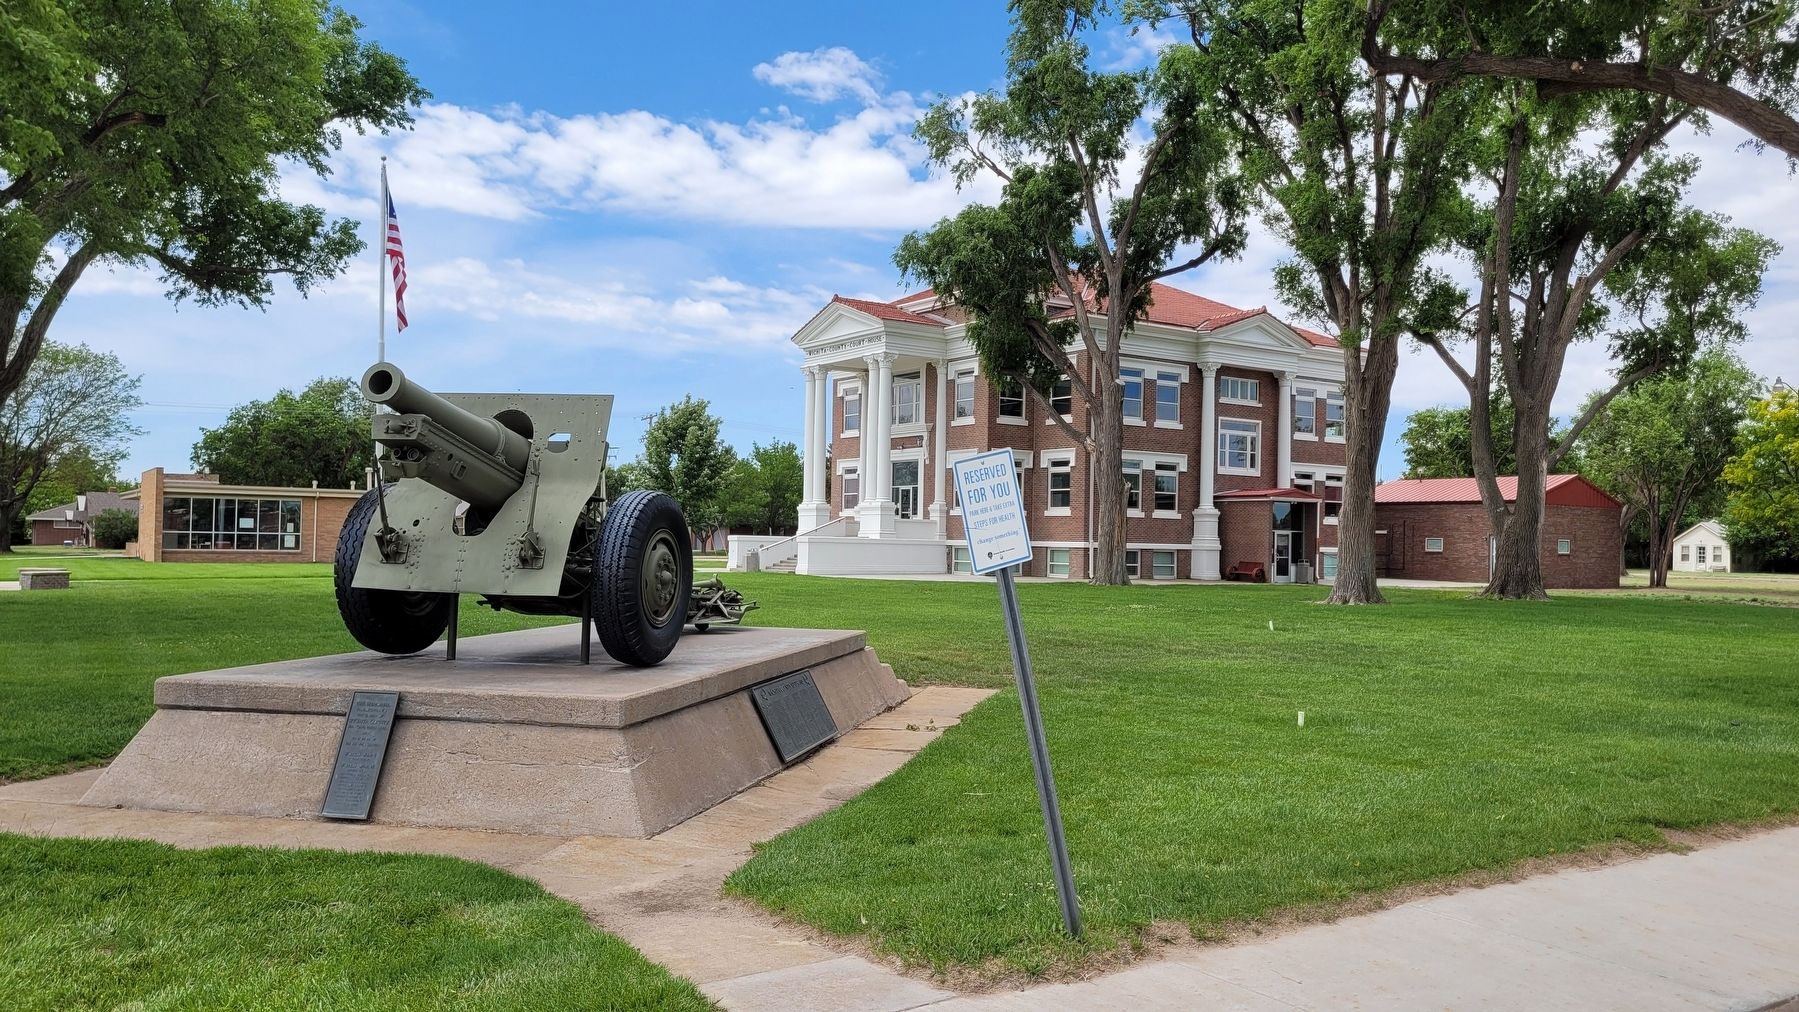 The Wichita County War Memorial is on the front of the cannon image. Click for full size.